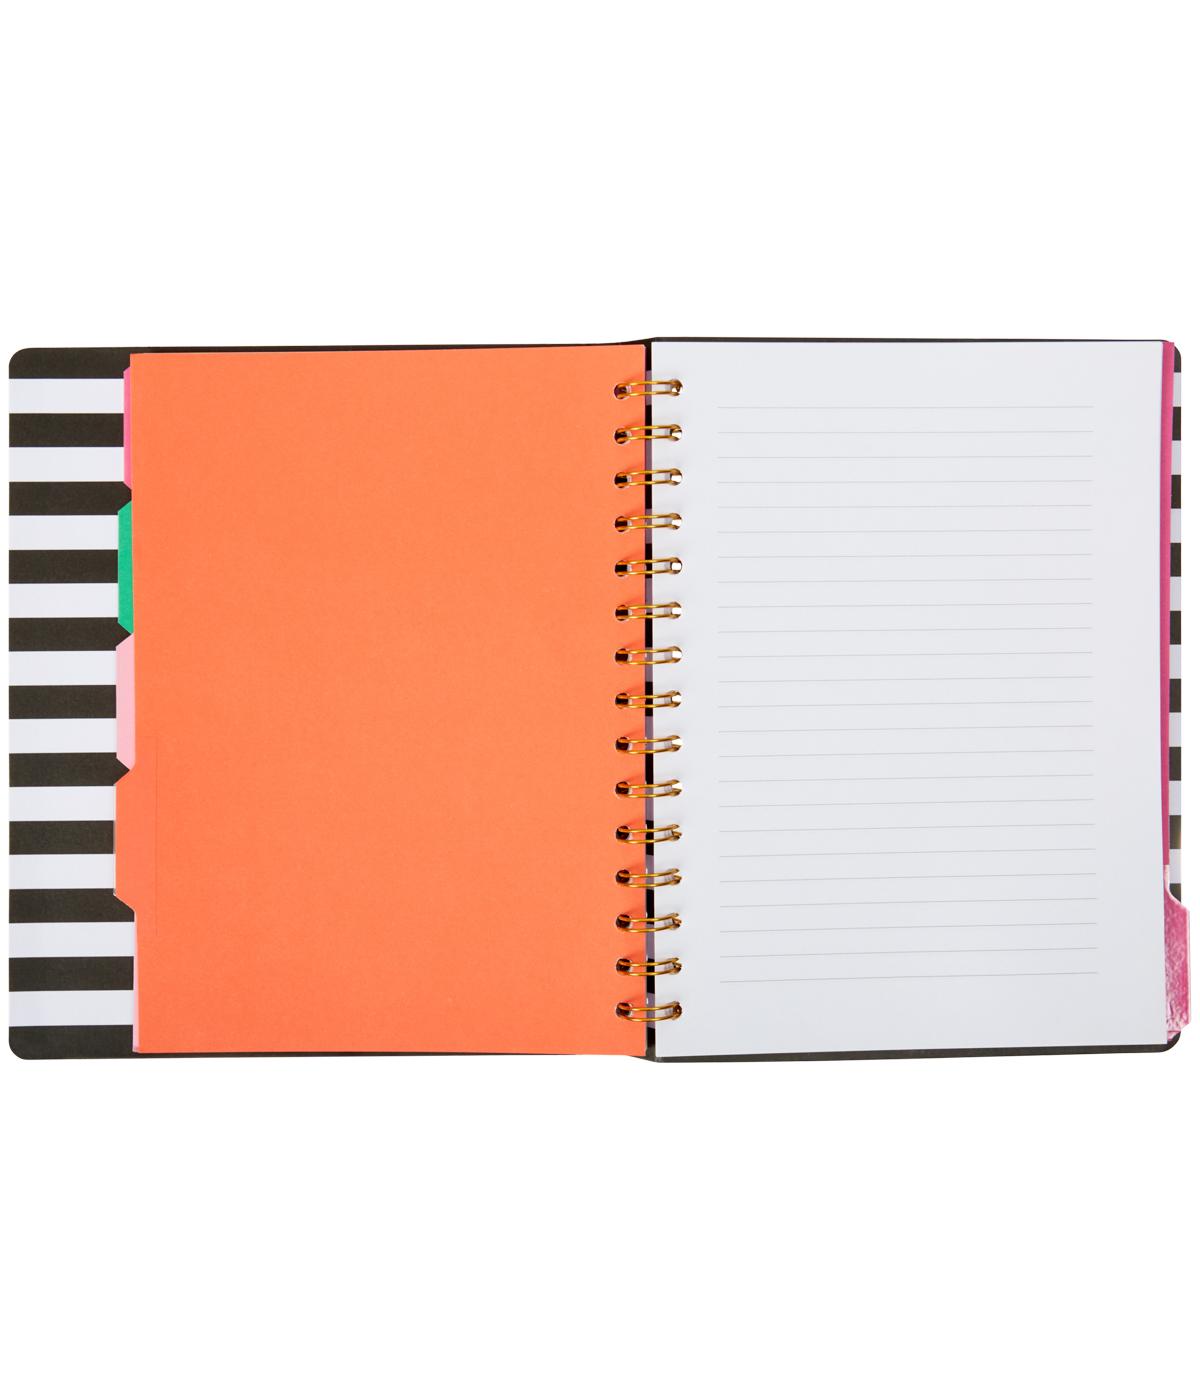 C.R. Gibson Polka Dot Twin Wire 5-Tab Lined Journal; image 3 of 3